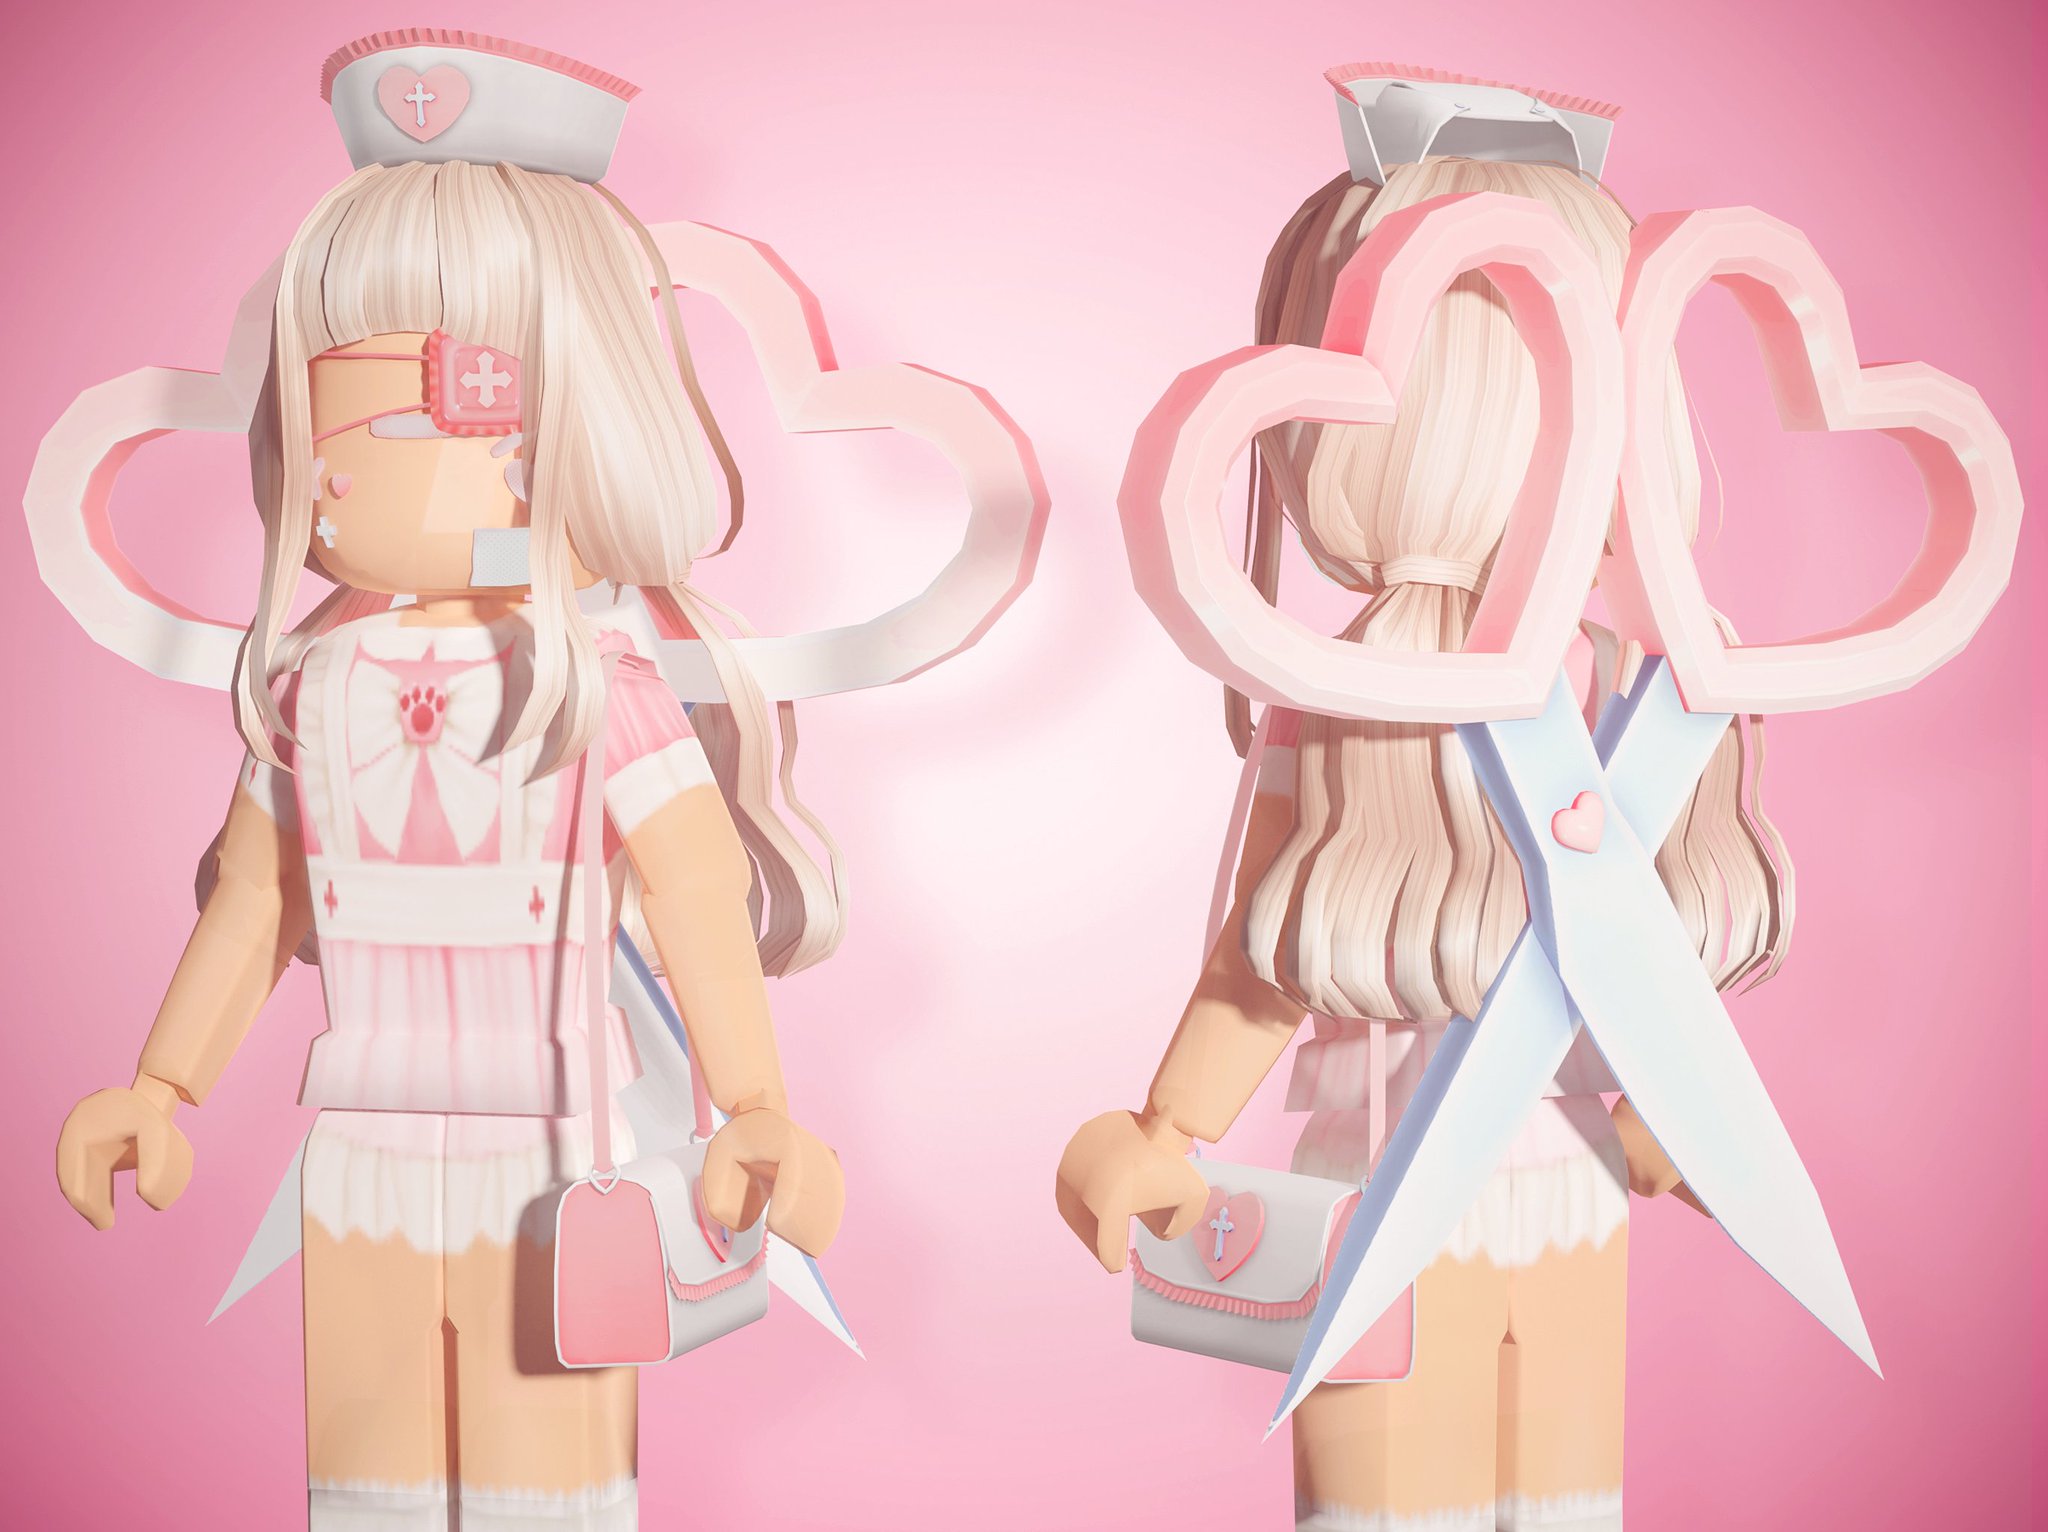 Ellie On Twitter Ellieberries Concept 2 Heartsick Nurse Yaay My Second Concept Is Finally Here I Ve Always Wanted To Do A Nurse Concept For So Long Maybe I Ll Make Different Nurse - nurse uniform roblox